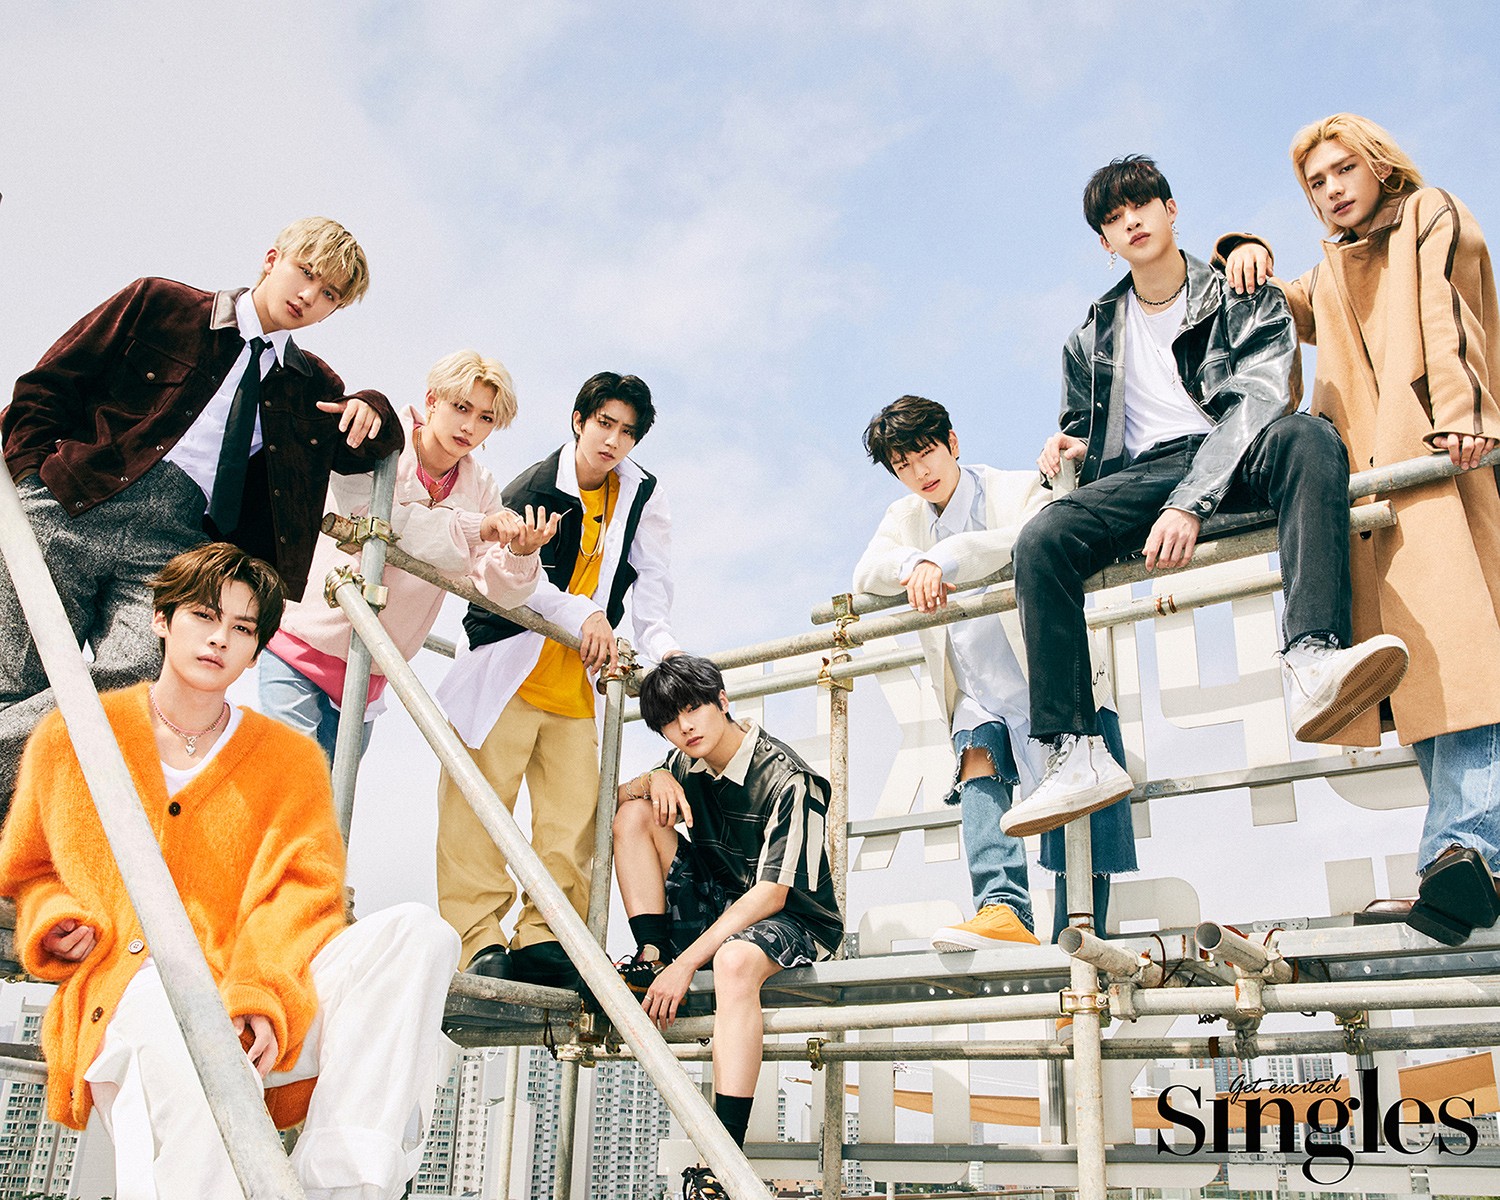 Fashion magazine Singles has released a visual picture of Stray Kids.Stray Kids is the back door of this picture, which shows the image of a clear and pure boy from the charisma of a hot and strong man to the picture that captures the womans heart.Stray Kids, who is starting a comeback with IN Life three months after his first full-length album GO Life in June 2020, consists of three teams of producing team Bang Chan, Changbin, Han, and Seungmin, Aien, and Rino, Hyunjin and Felix, called the dance line, who make their own songs and go on stage after intense practice. Its a talented Idol group.Bang Chan, a member of the teams production group Three Lacha, said, When I work on Music, I like hip-hop and R & B, but I also work on a lot of calm songs.In particular, I would like to express various expressions through titles or lyrics. There are messages that we want to convey in the lyrics, but it is also important how listeners interpret them.The ambivalent expression has many interesting points. Stray Kids, who said that Musics ultimate goal is to continue to show our genre, said, We want to be a group that is recognized by many people around the world with the music we make and show ourselves.When I first became a trainee, there was a time when everything was unfamiliar and unadapted.I felt like a stranger, but I was able to adapt and practice hard and become the Stray Kids of the present. Hyunjin said, I watched a lot of images of Taemin and Jimin who I like and respect, and made me an opportunity to catch and stimulate me.Its the goal of achieving a dream, and its full of it now, Changbin said.About 20 unit names that fans have made like nicknames.Among them, Stray Kids, who said that 10 units of Kaguanz (Sung Riz), Honey Mengs, Dangunz, Coin Taste Tteokbokkiz (Dongdukz), Limakz (Last Maks), Meddance, Molize, Bread Honeys, Poms, and Seocrafts were impressive, said, The name is so cute.I am proud that we have various units and we are getting better together. Stray Kidss interview with the pictorials, which are expected to be more colorful as talented musicians due to infinite possibilities, can be found in the September issue of Singles and the mobile issue of Singles (m.thesingle.co.kr).